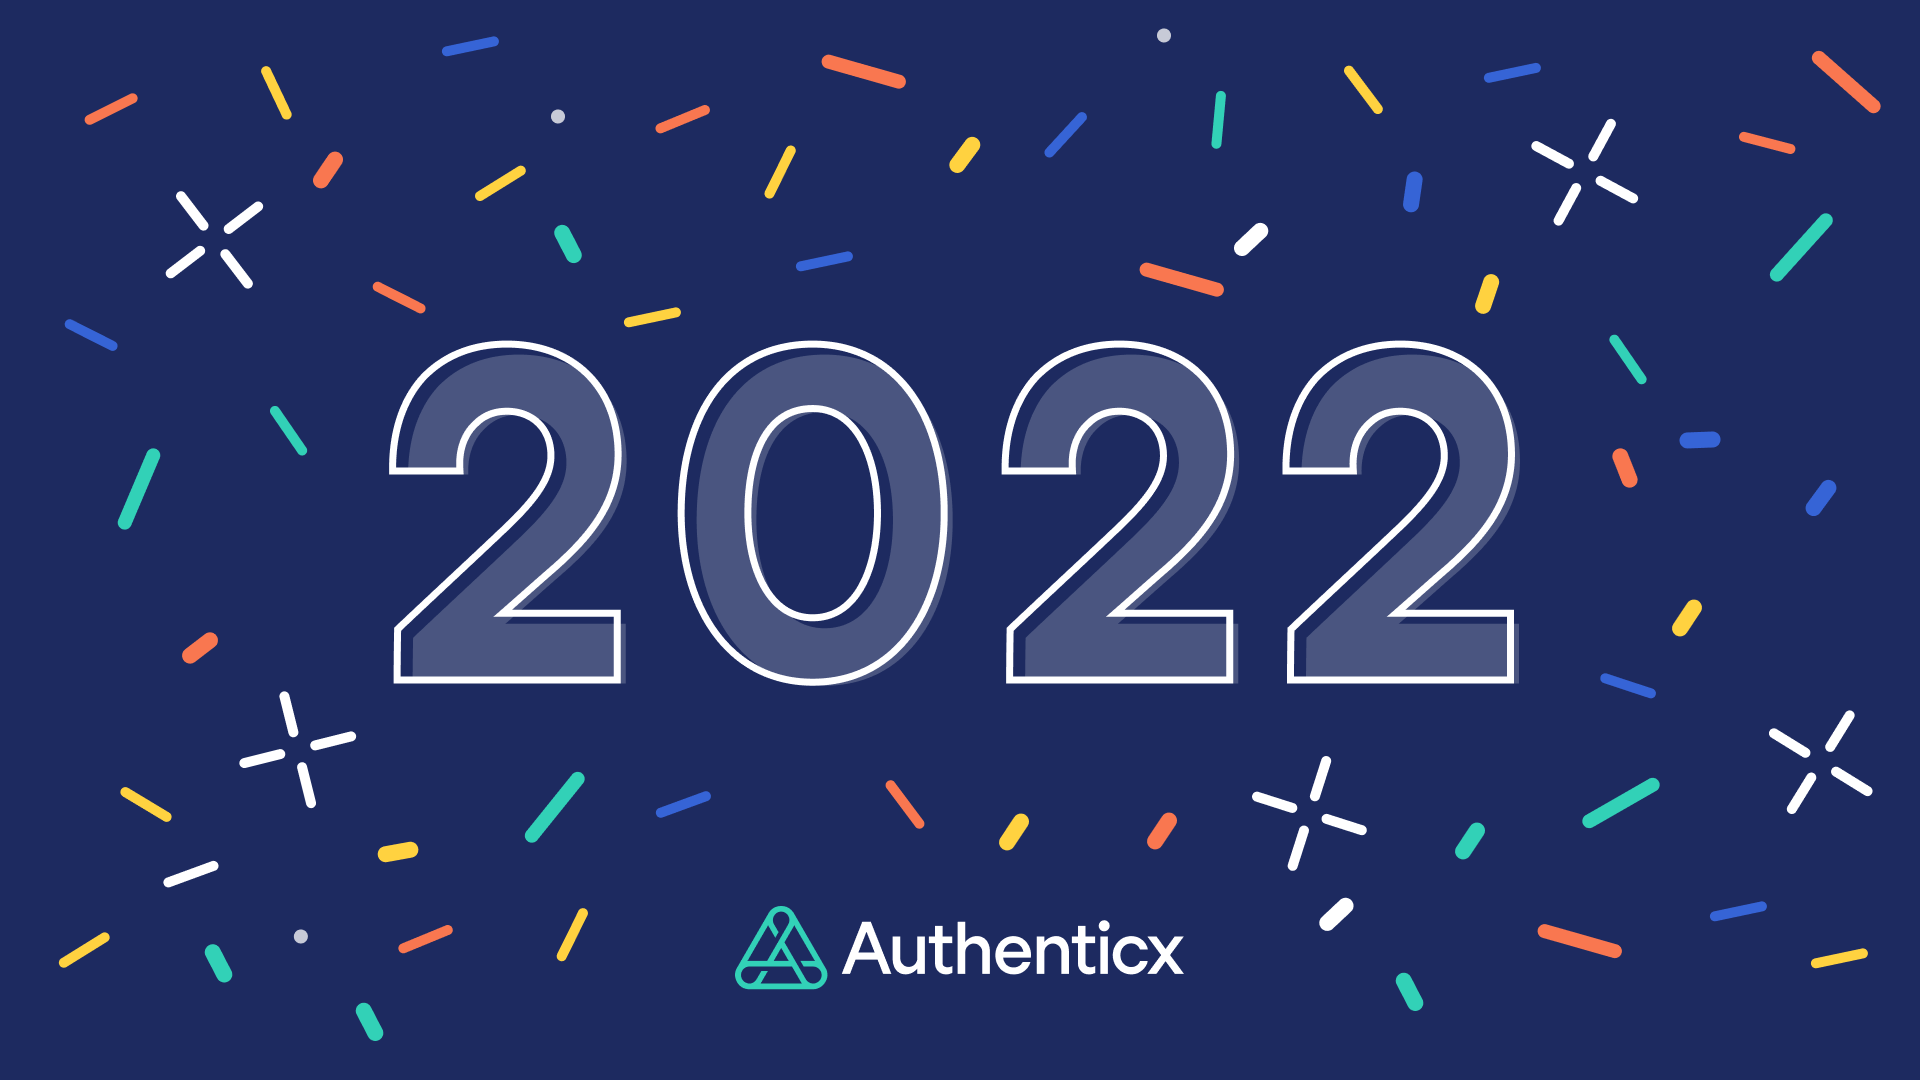 Authenticx Ends Year on High Note, Looks Ahead to 2023 | Authenticx